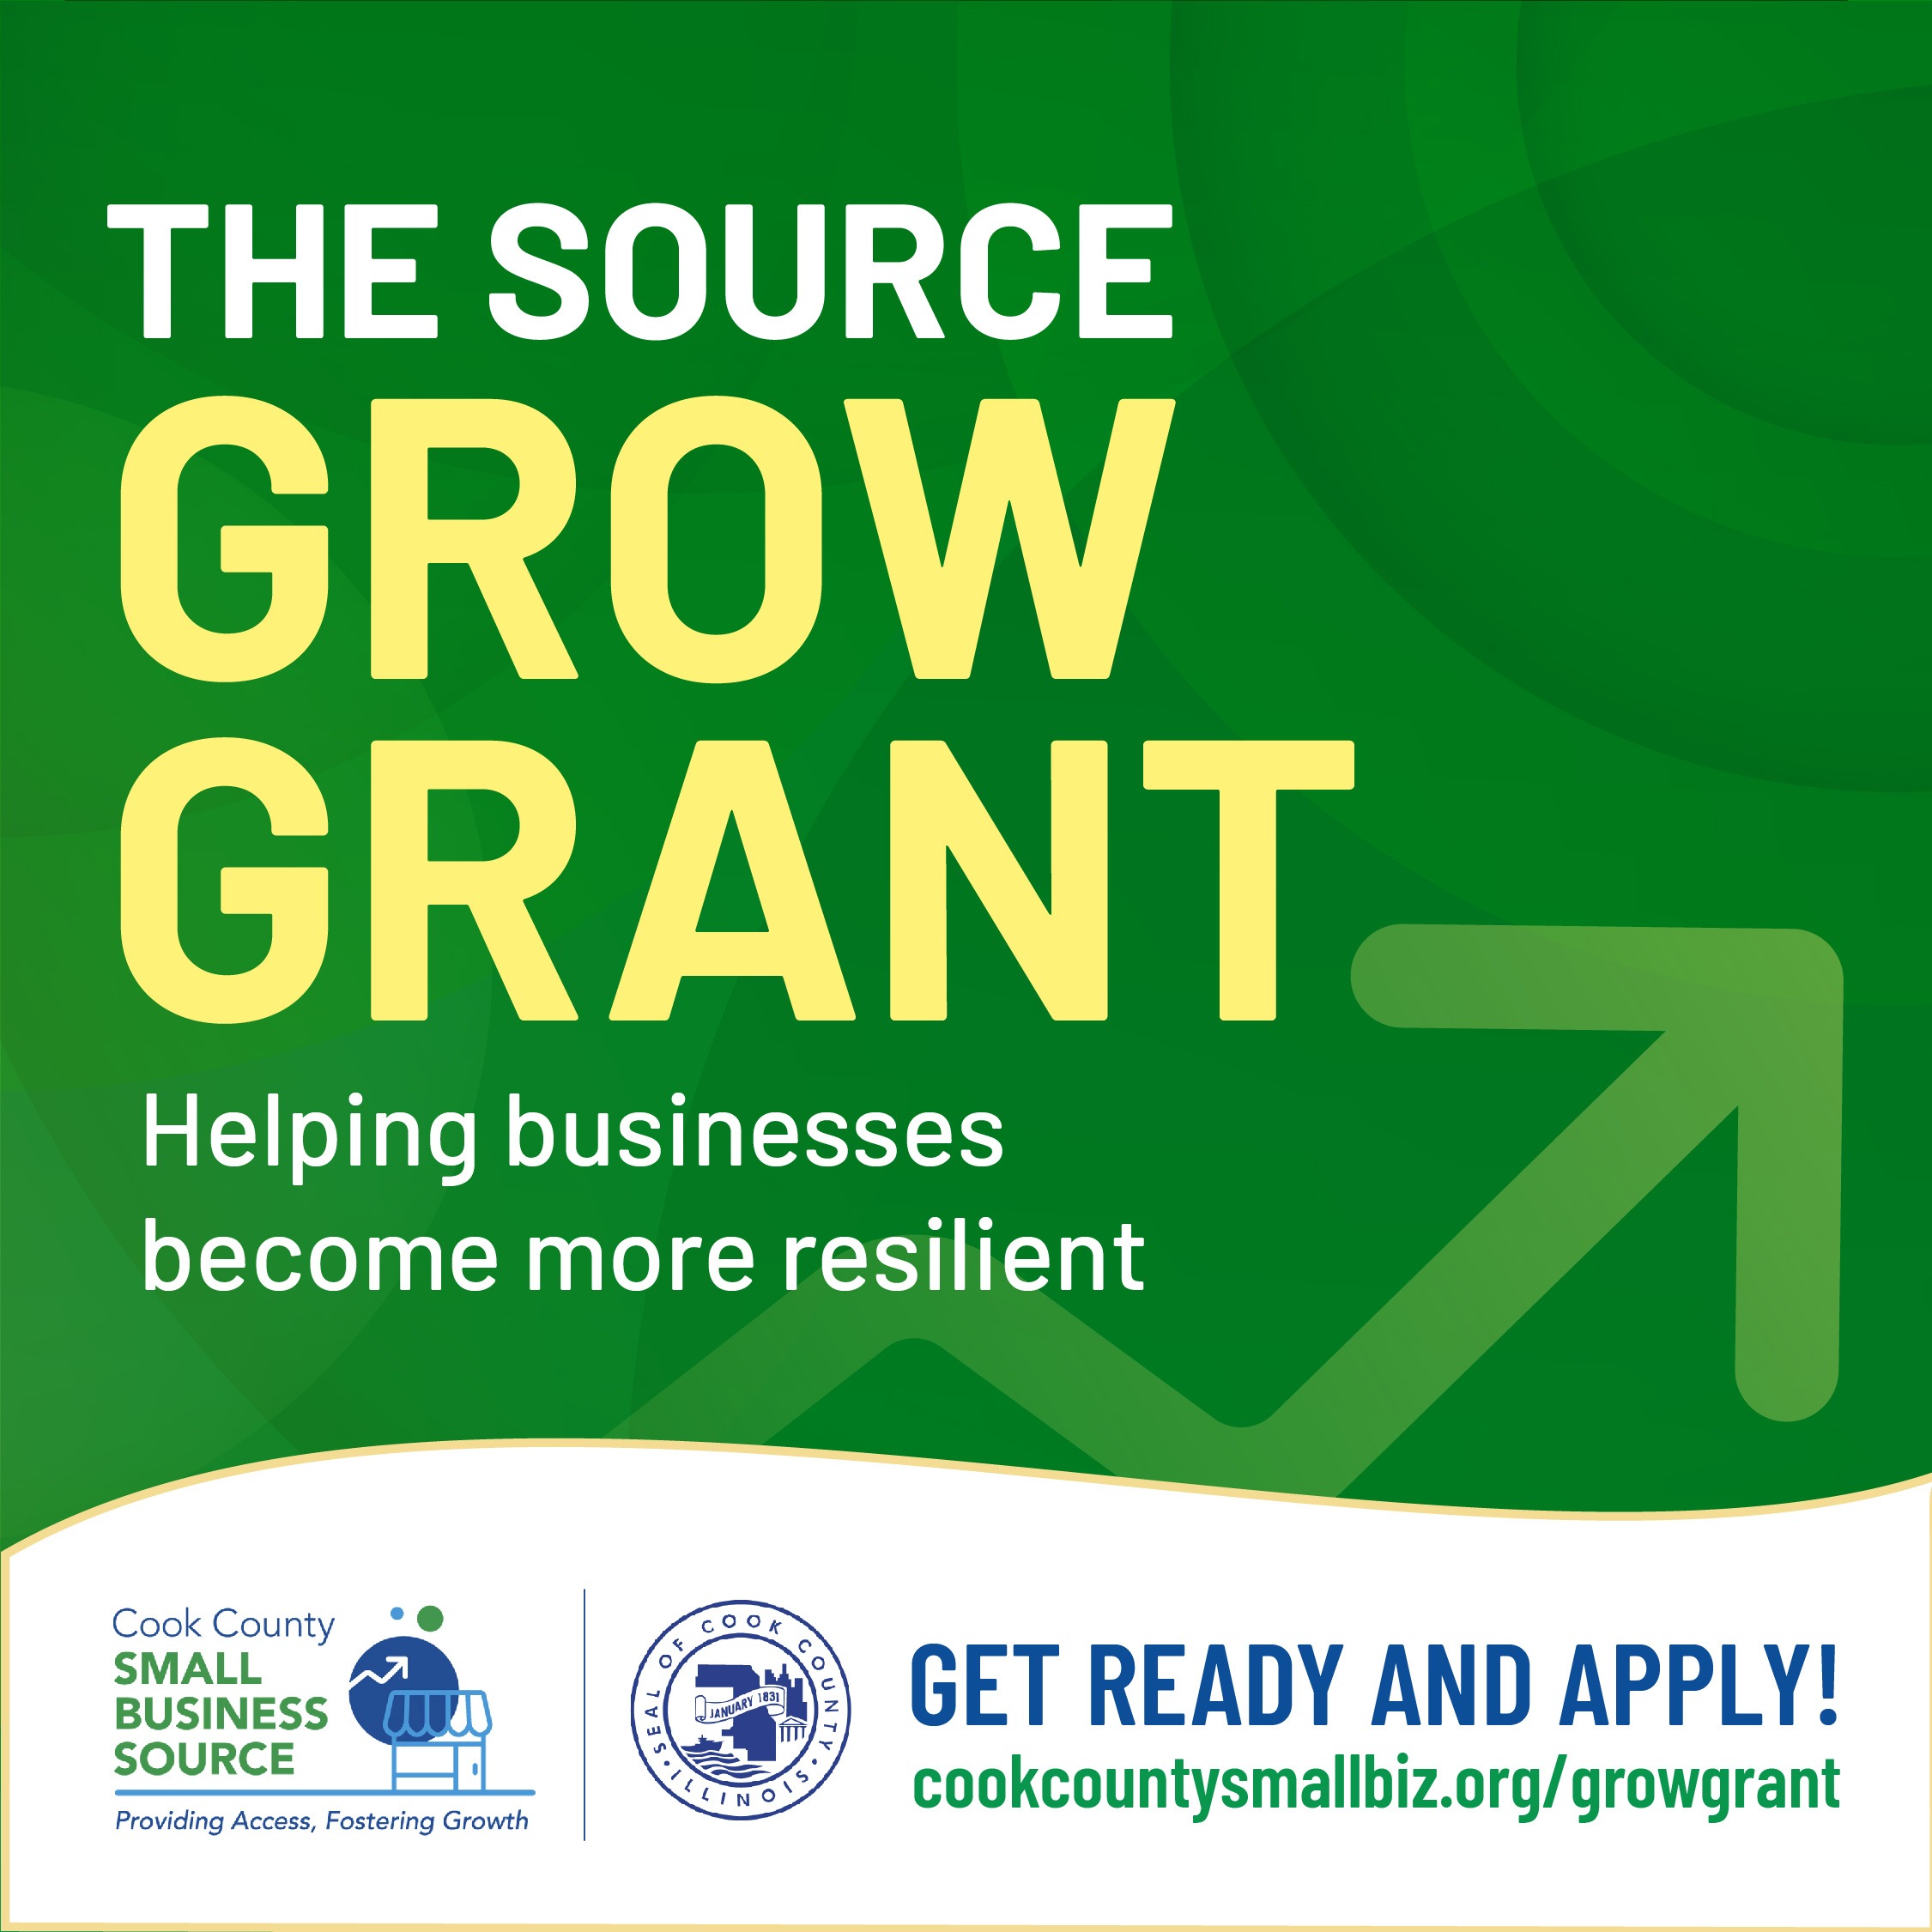 The Source Grow Grant